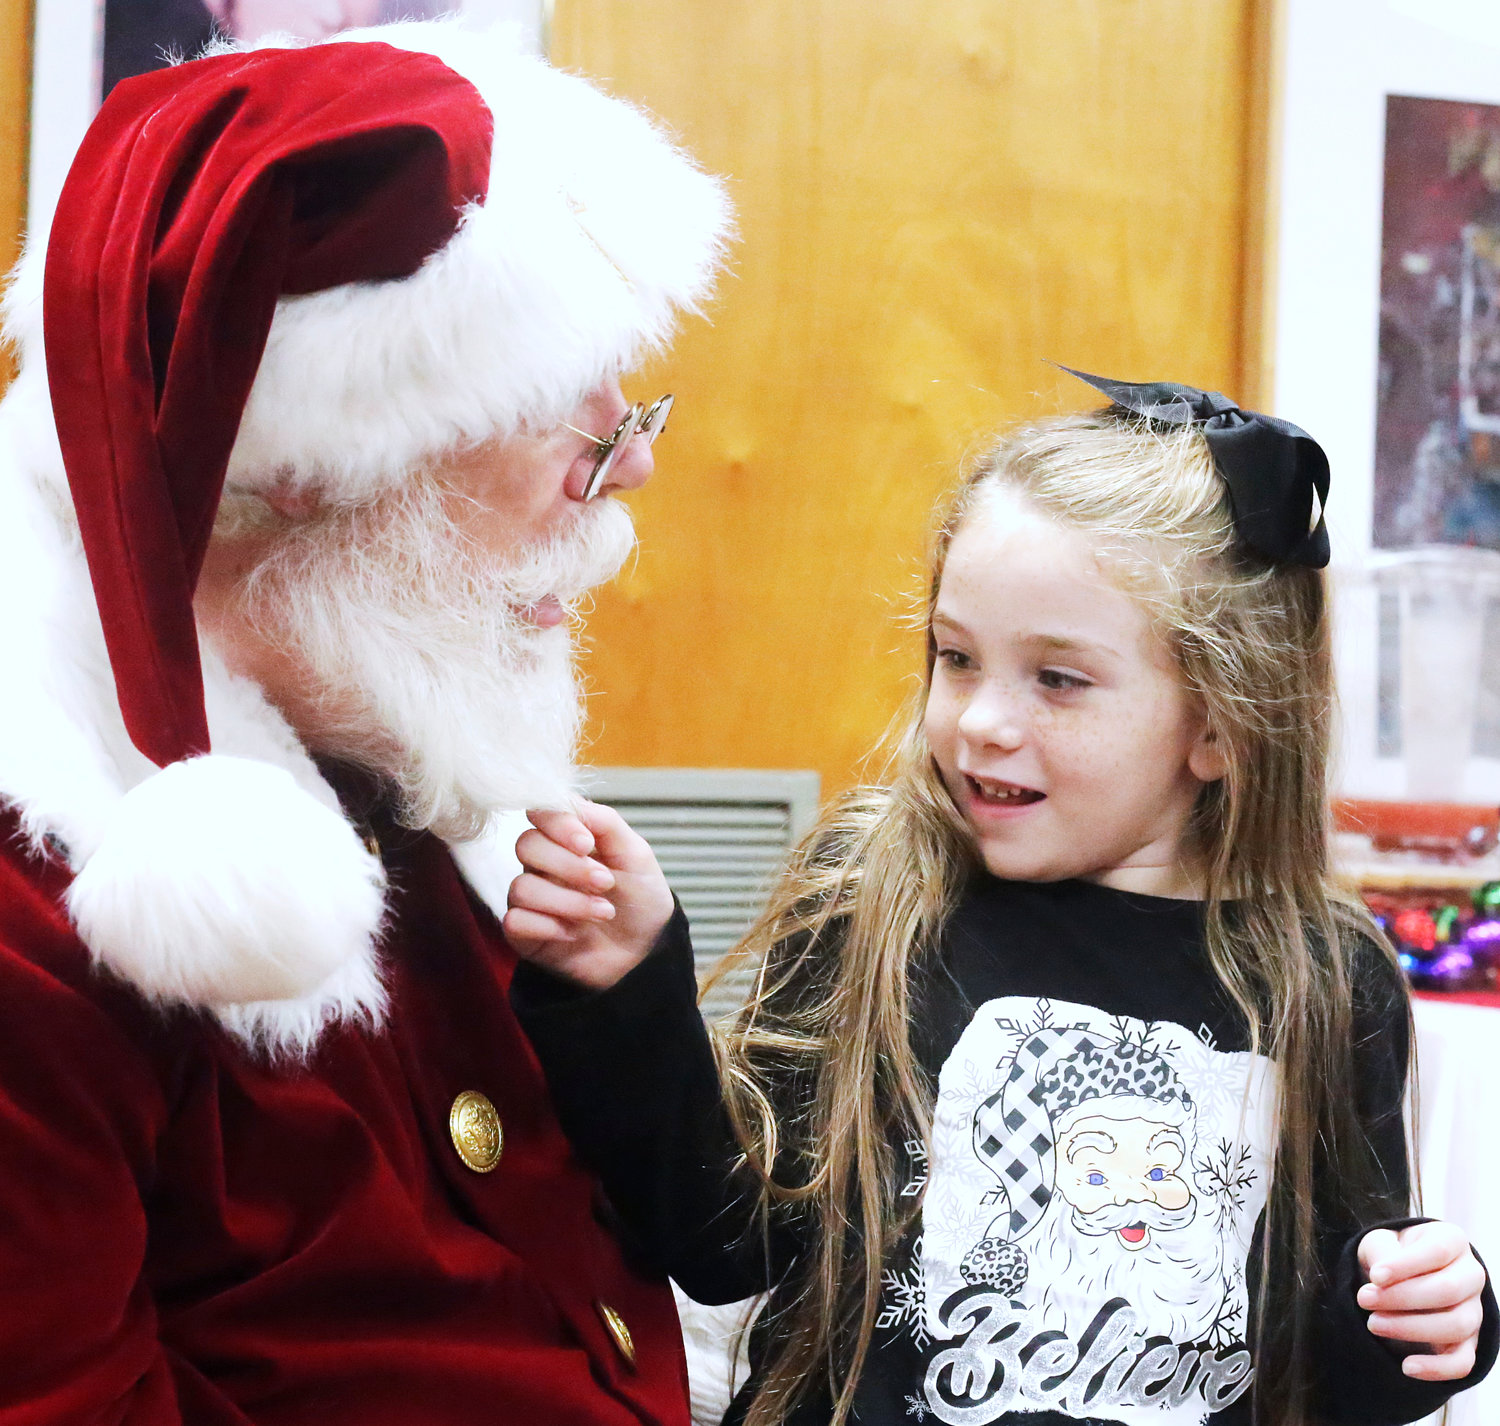 Madelynn Smith of Mineola gives Santa’s beard a little tug just to be sure he is real during a recent visit.